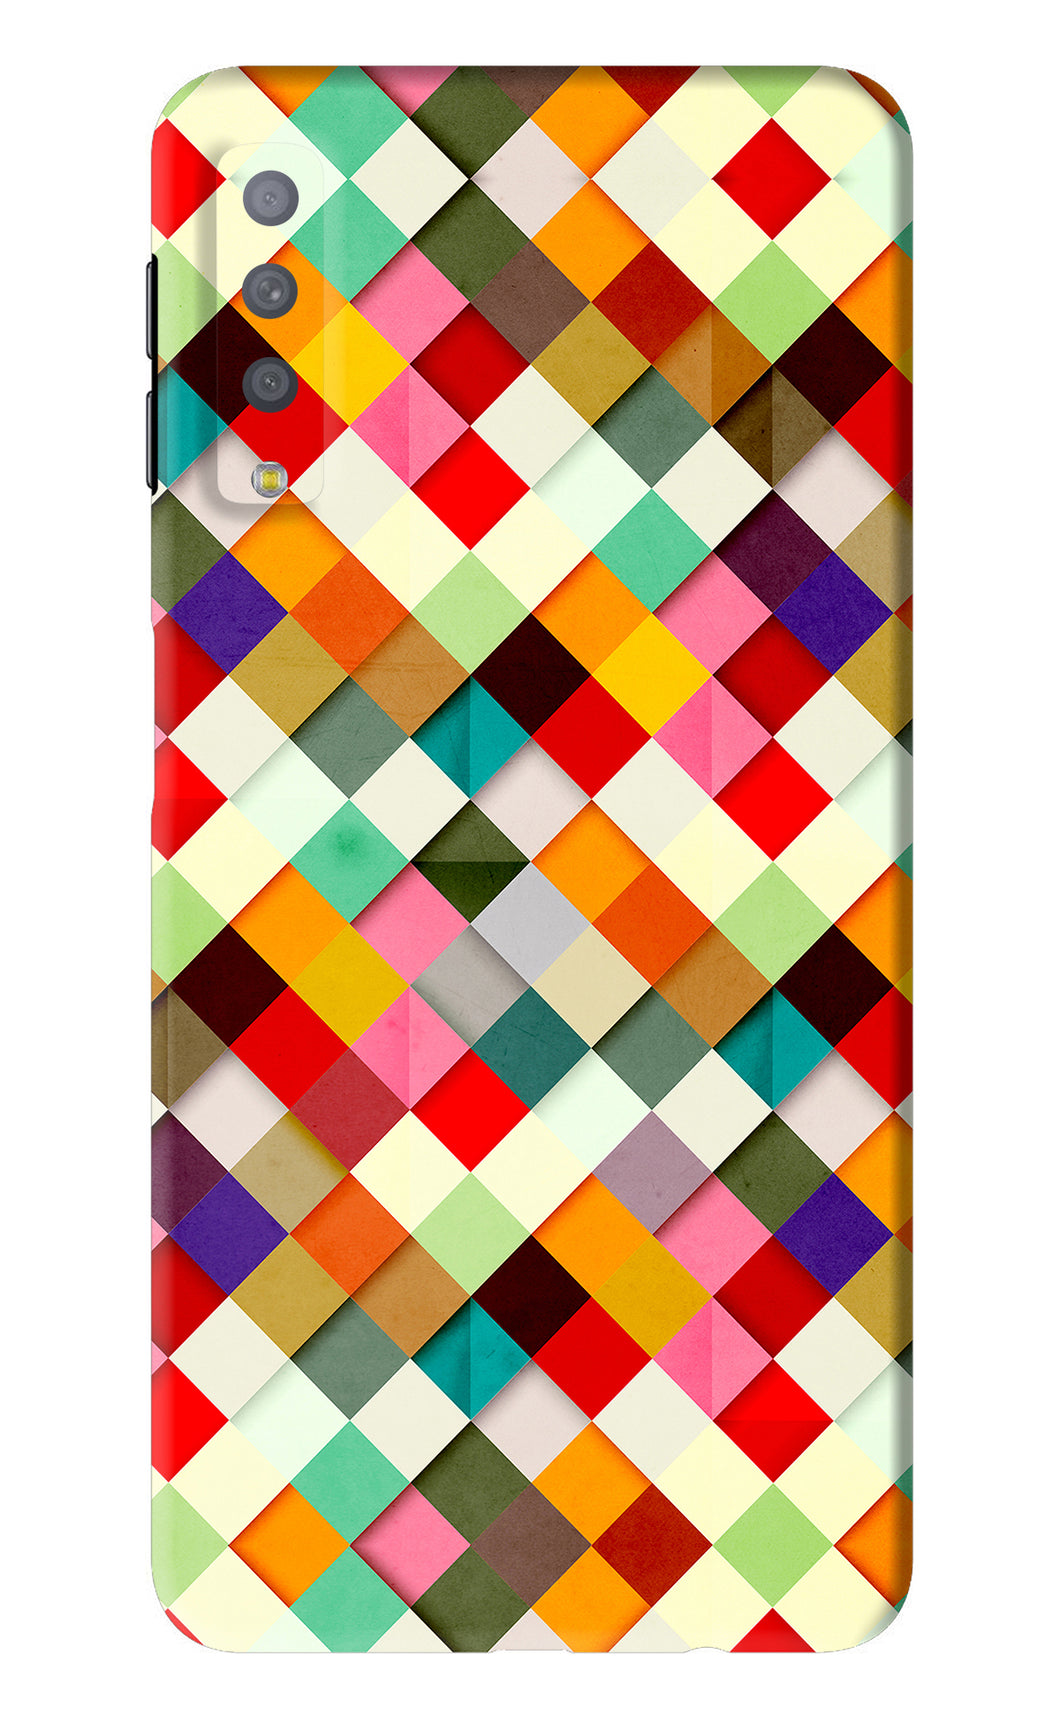 Geometric Abstract Colorful Samsung Galaxy A7 2018 Back Skin Wrap